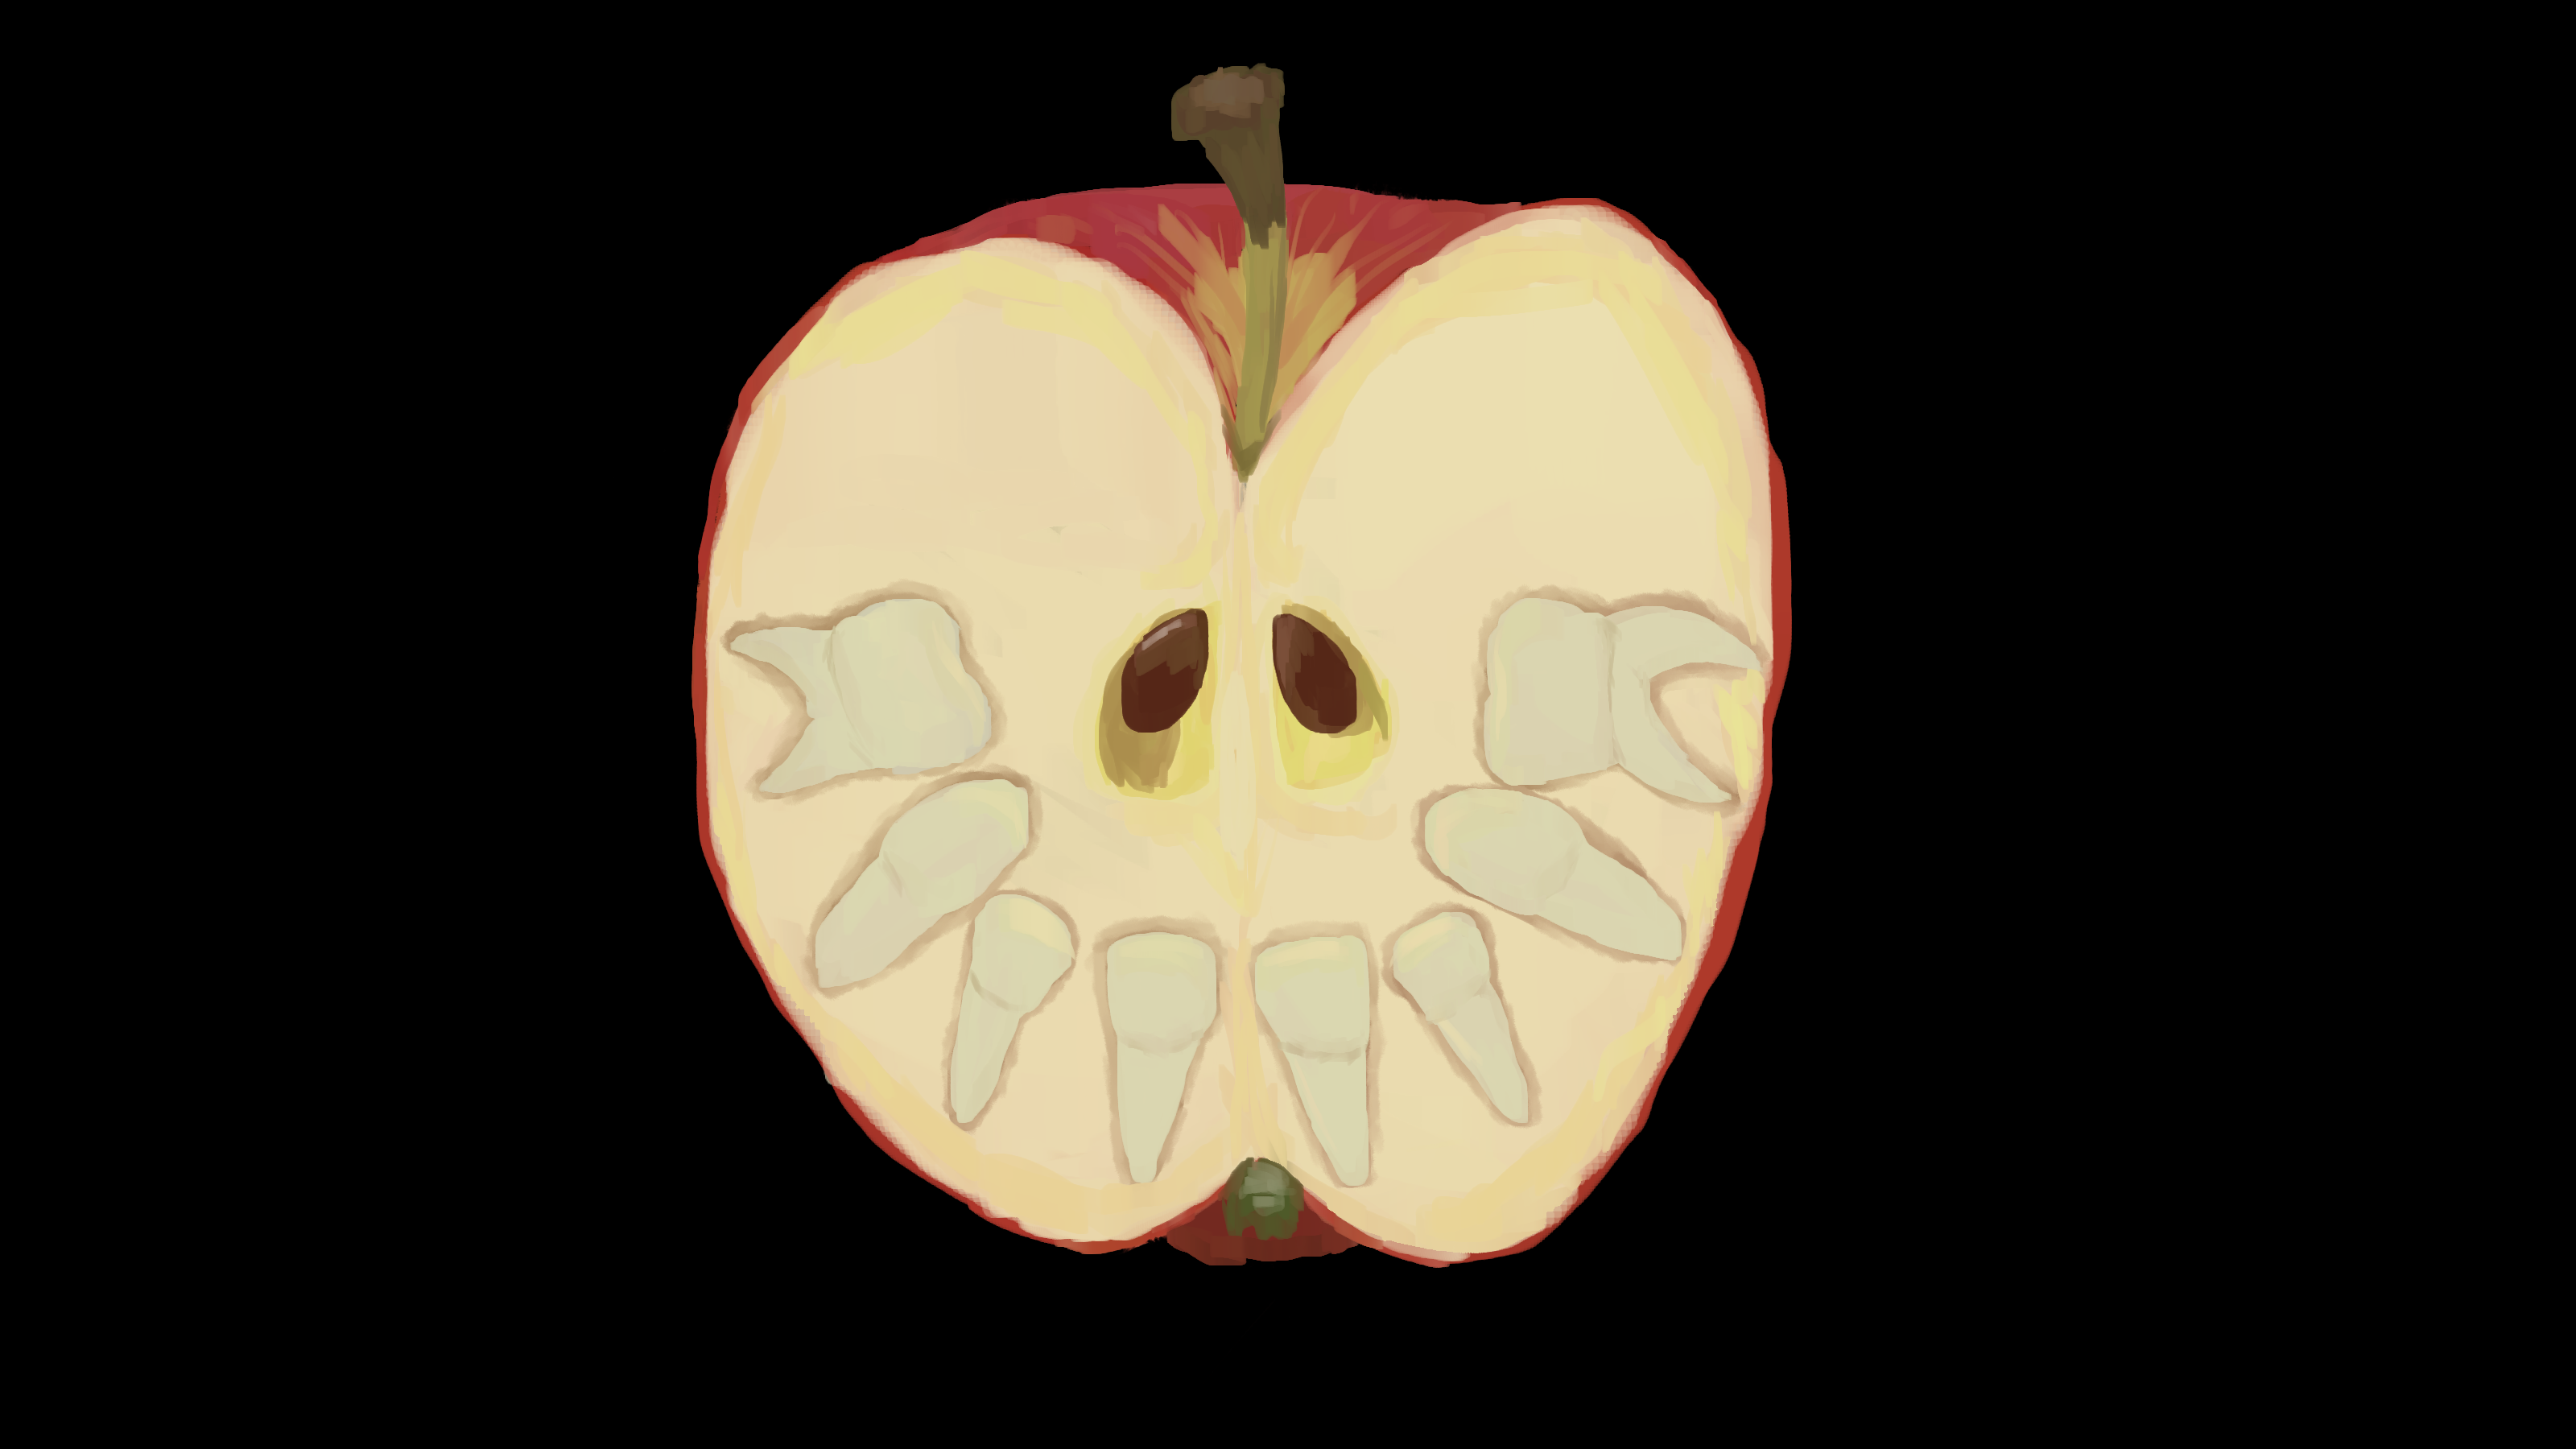 A digital painting of the apple from the magnus archives 34, an apple cut half to show human teeth arranged inside in a smile, the seeds take on the appearance of eyes.